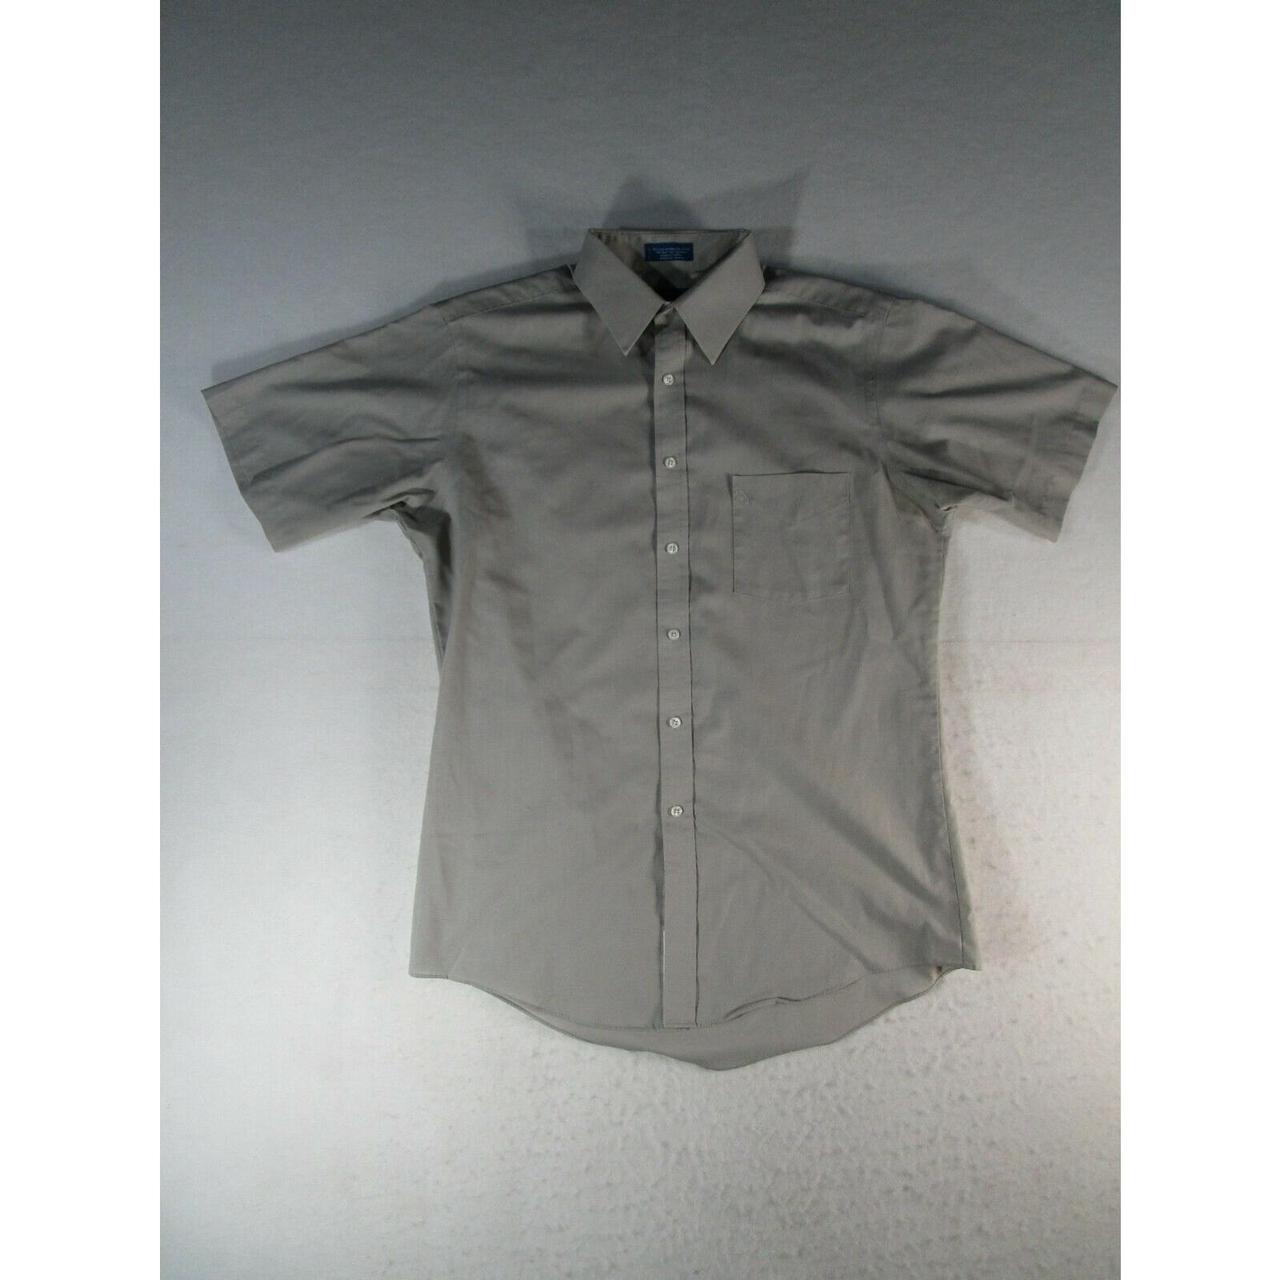 Product Image 1 - Towncraft Button Shirt Mens L